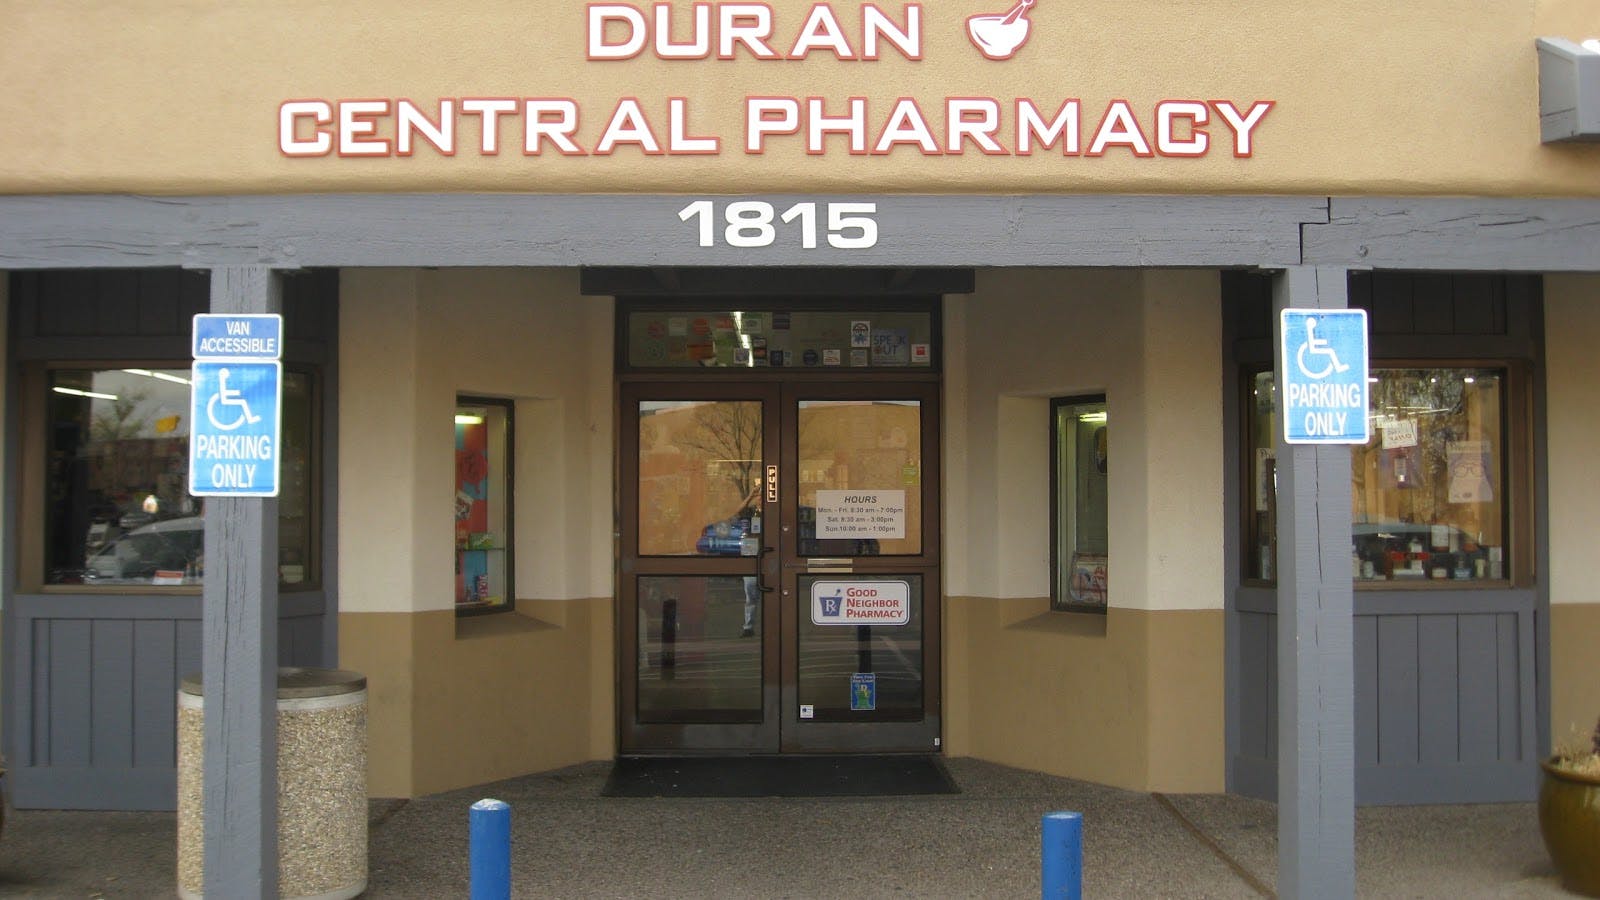 Image - Duran Central Pharmacy